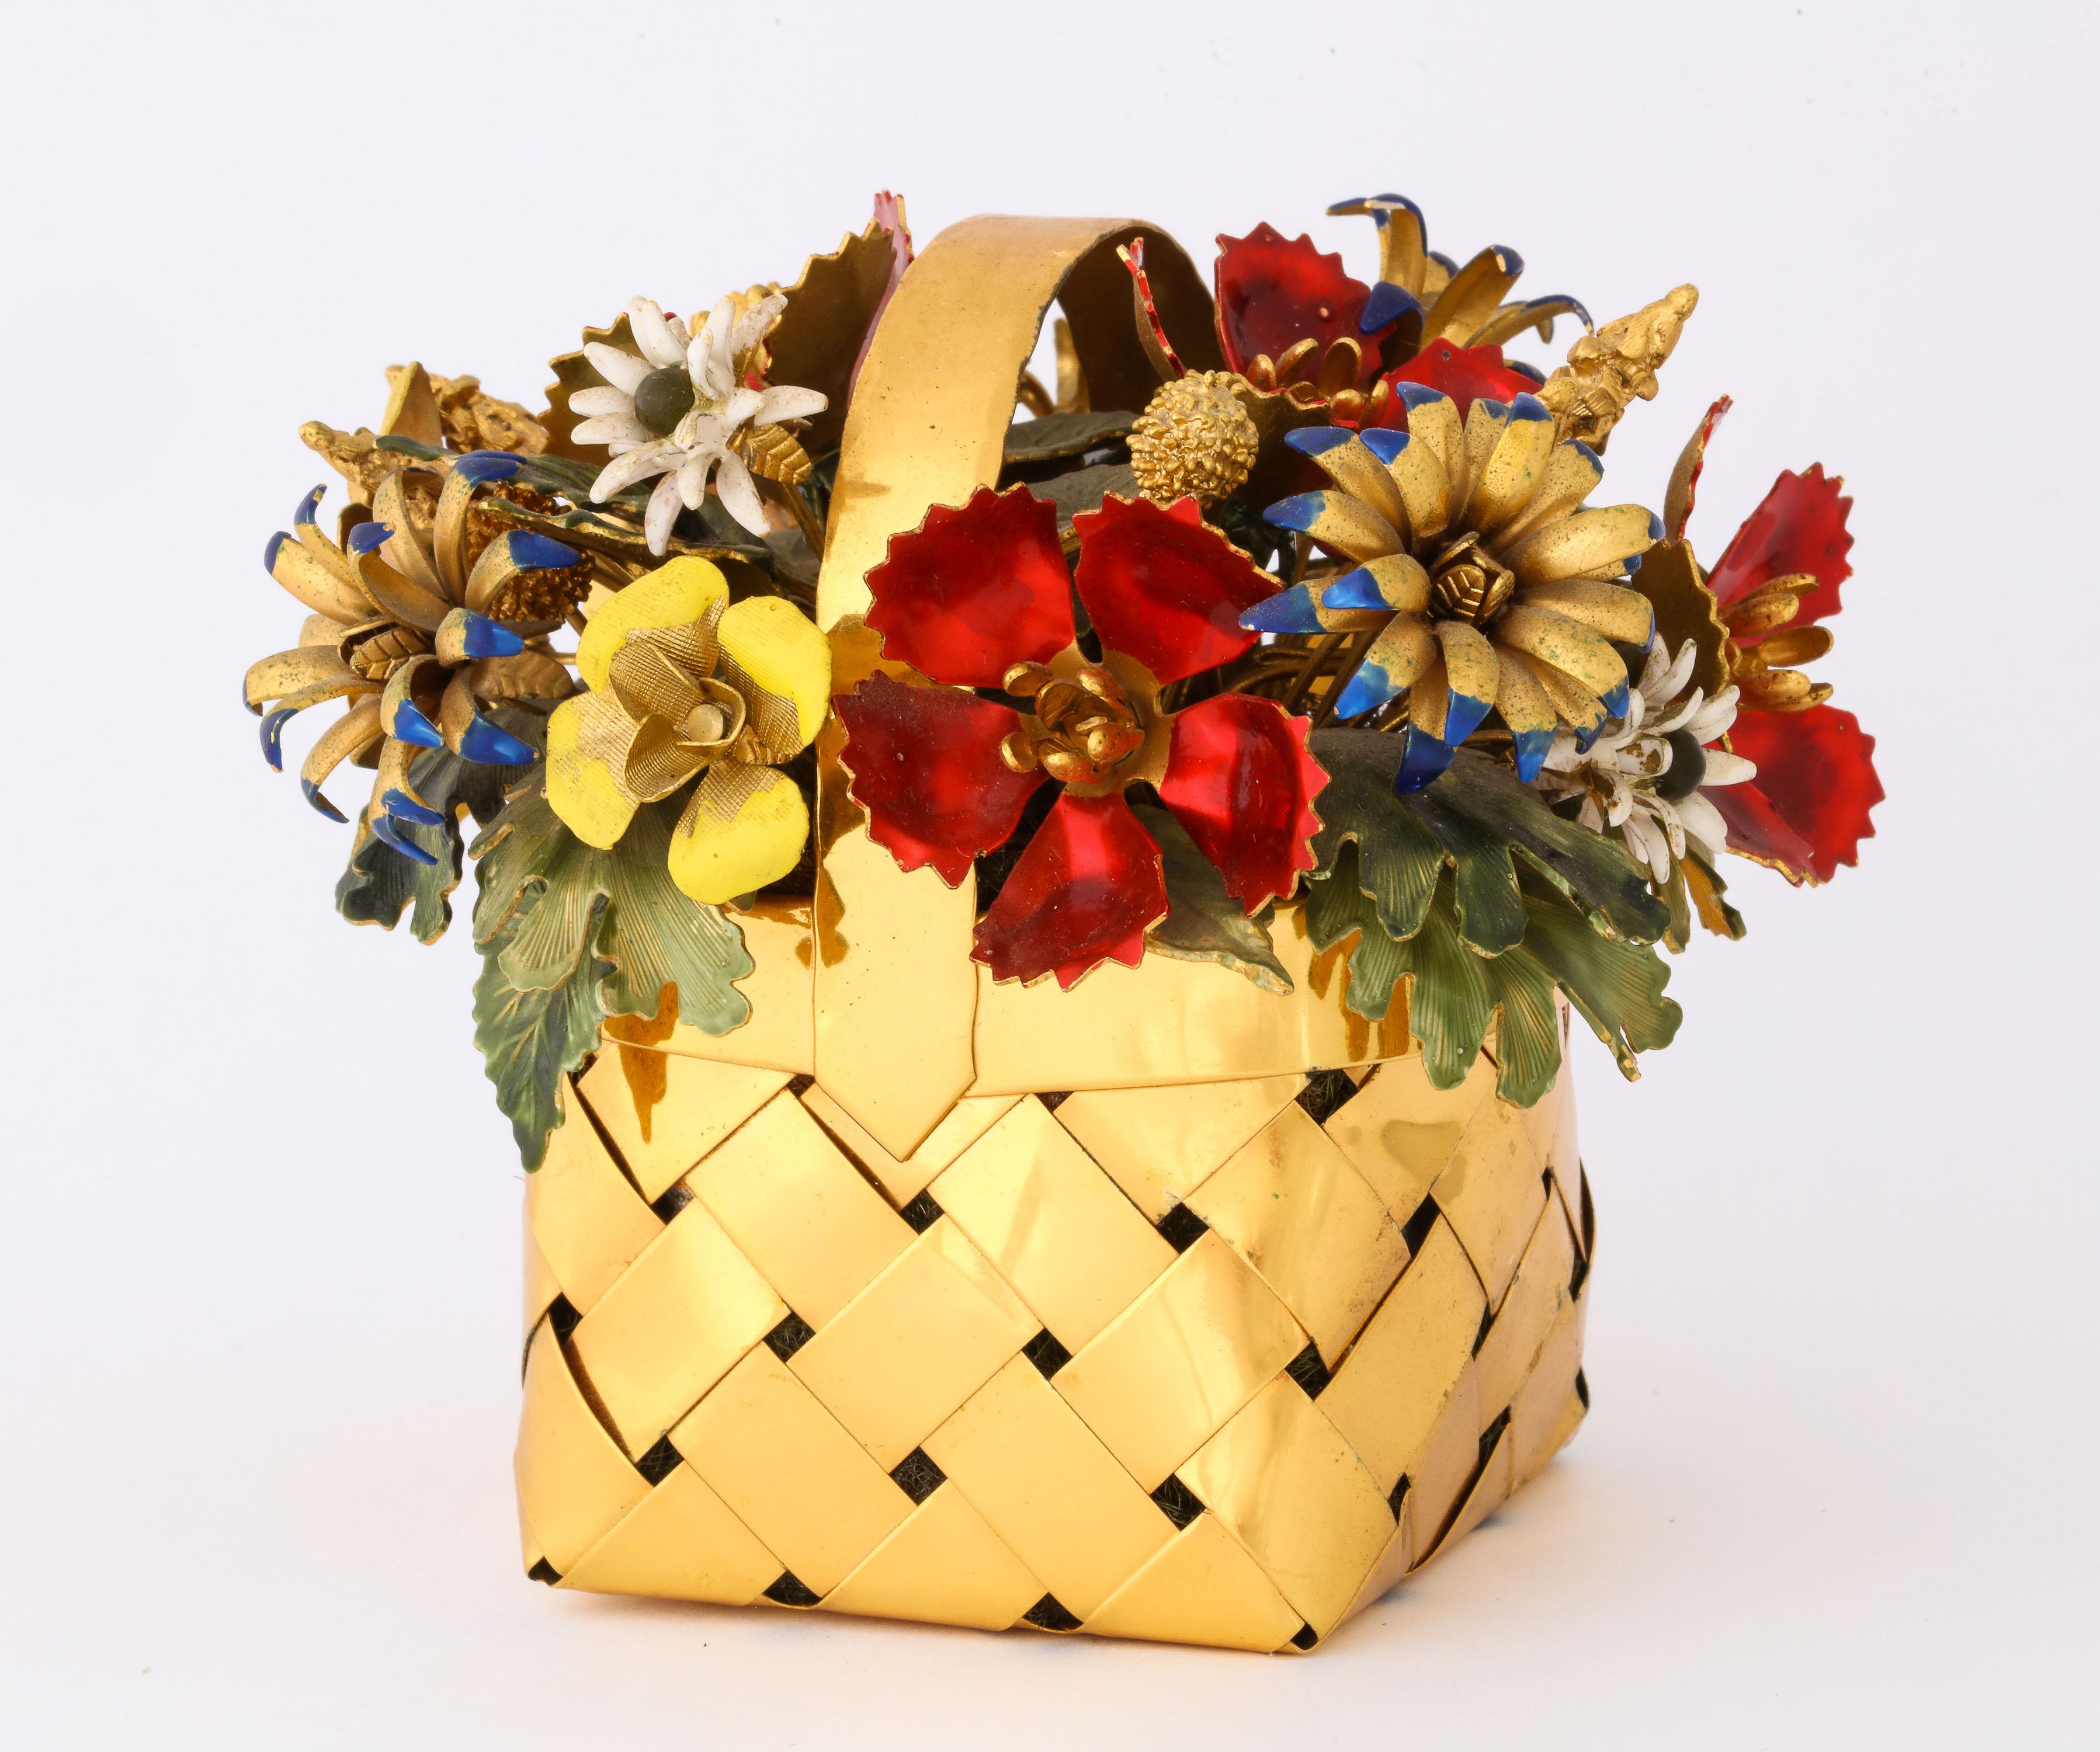 American Sterling Silver-Gilt and Enamel Table Ornament Basket by Cartier